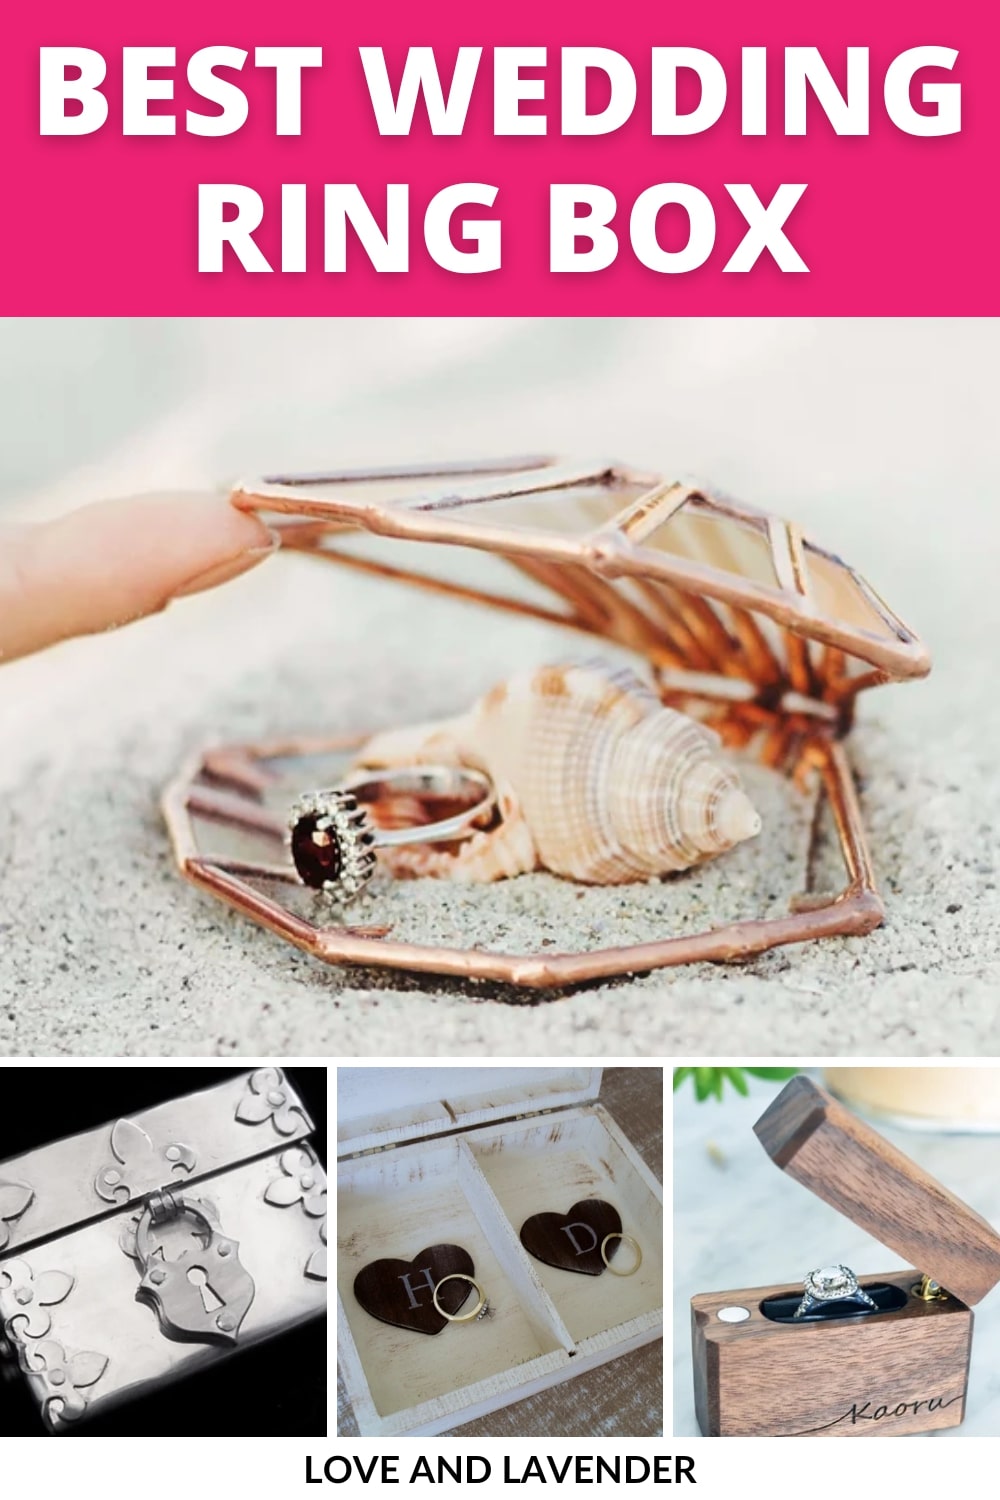 13 Wedding Ring Box Ideas for a Luxury Style